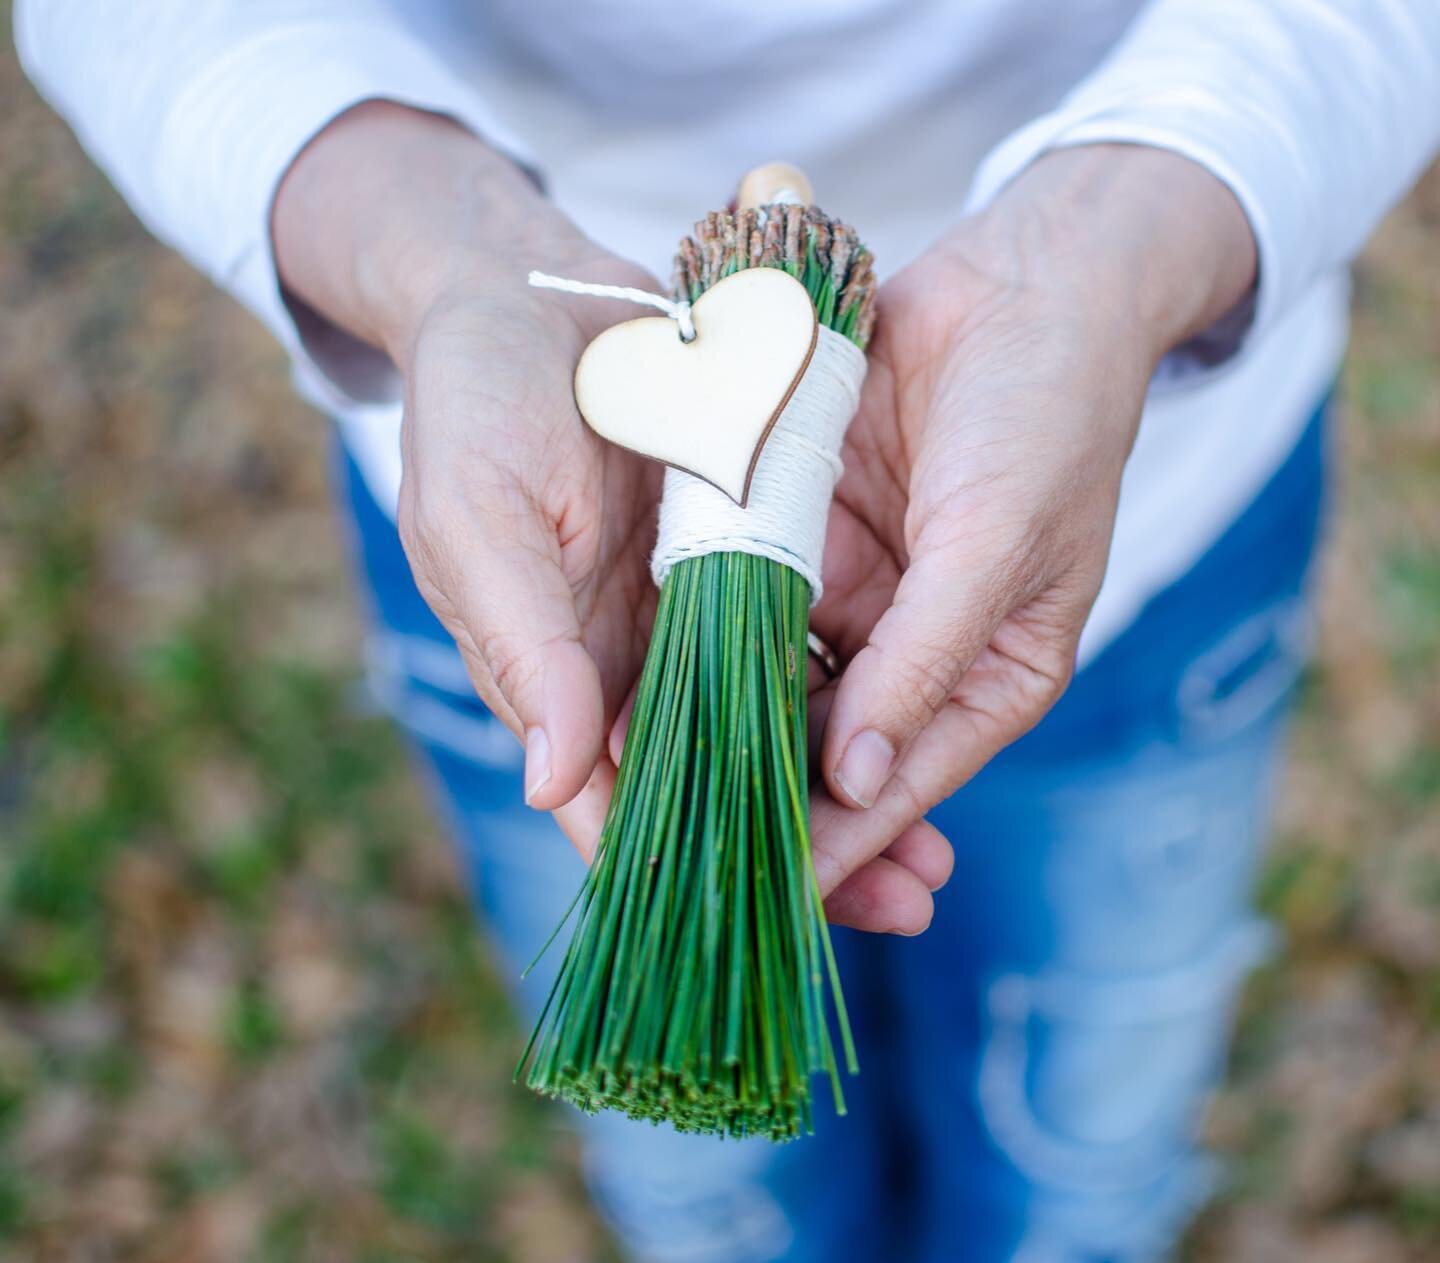 DIY: Handheld Pine Needle Basom (Broom) for a &ldquo; mindful&rdquo; spring cleaning for Passover 🌸

Did you know that spring cleaning for Passover is ancient Jewish custom? Last year when I talking to my friend @diklaya3583 about it, I learned that